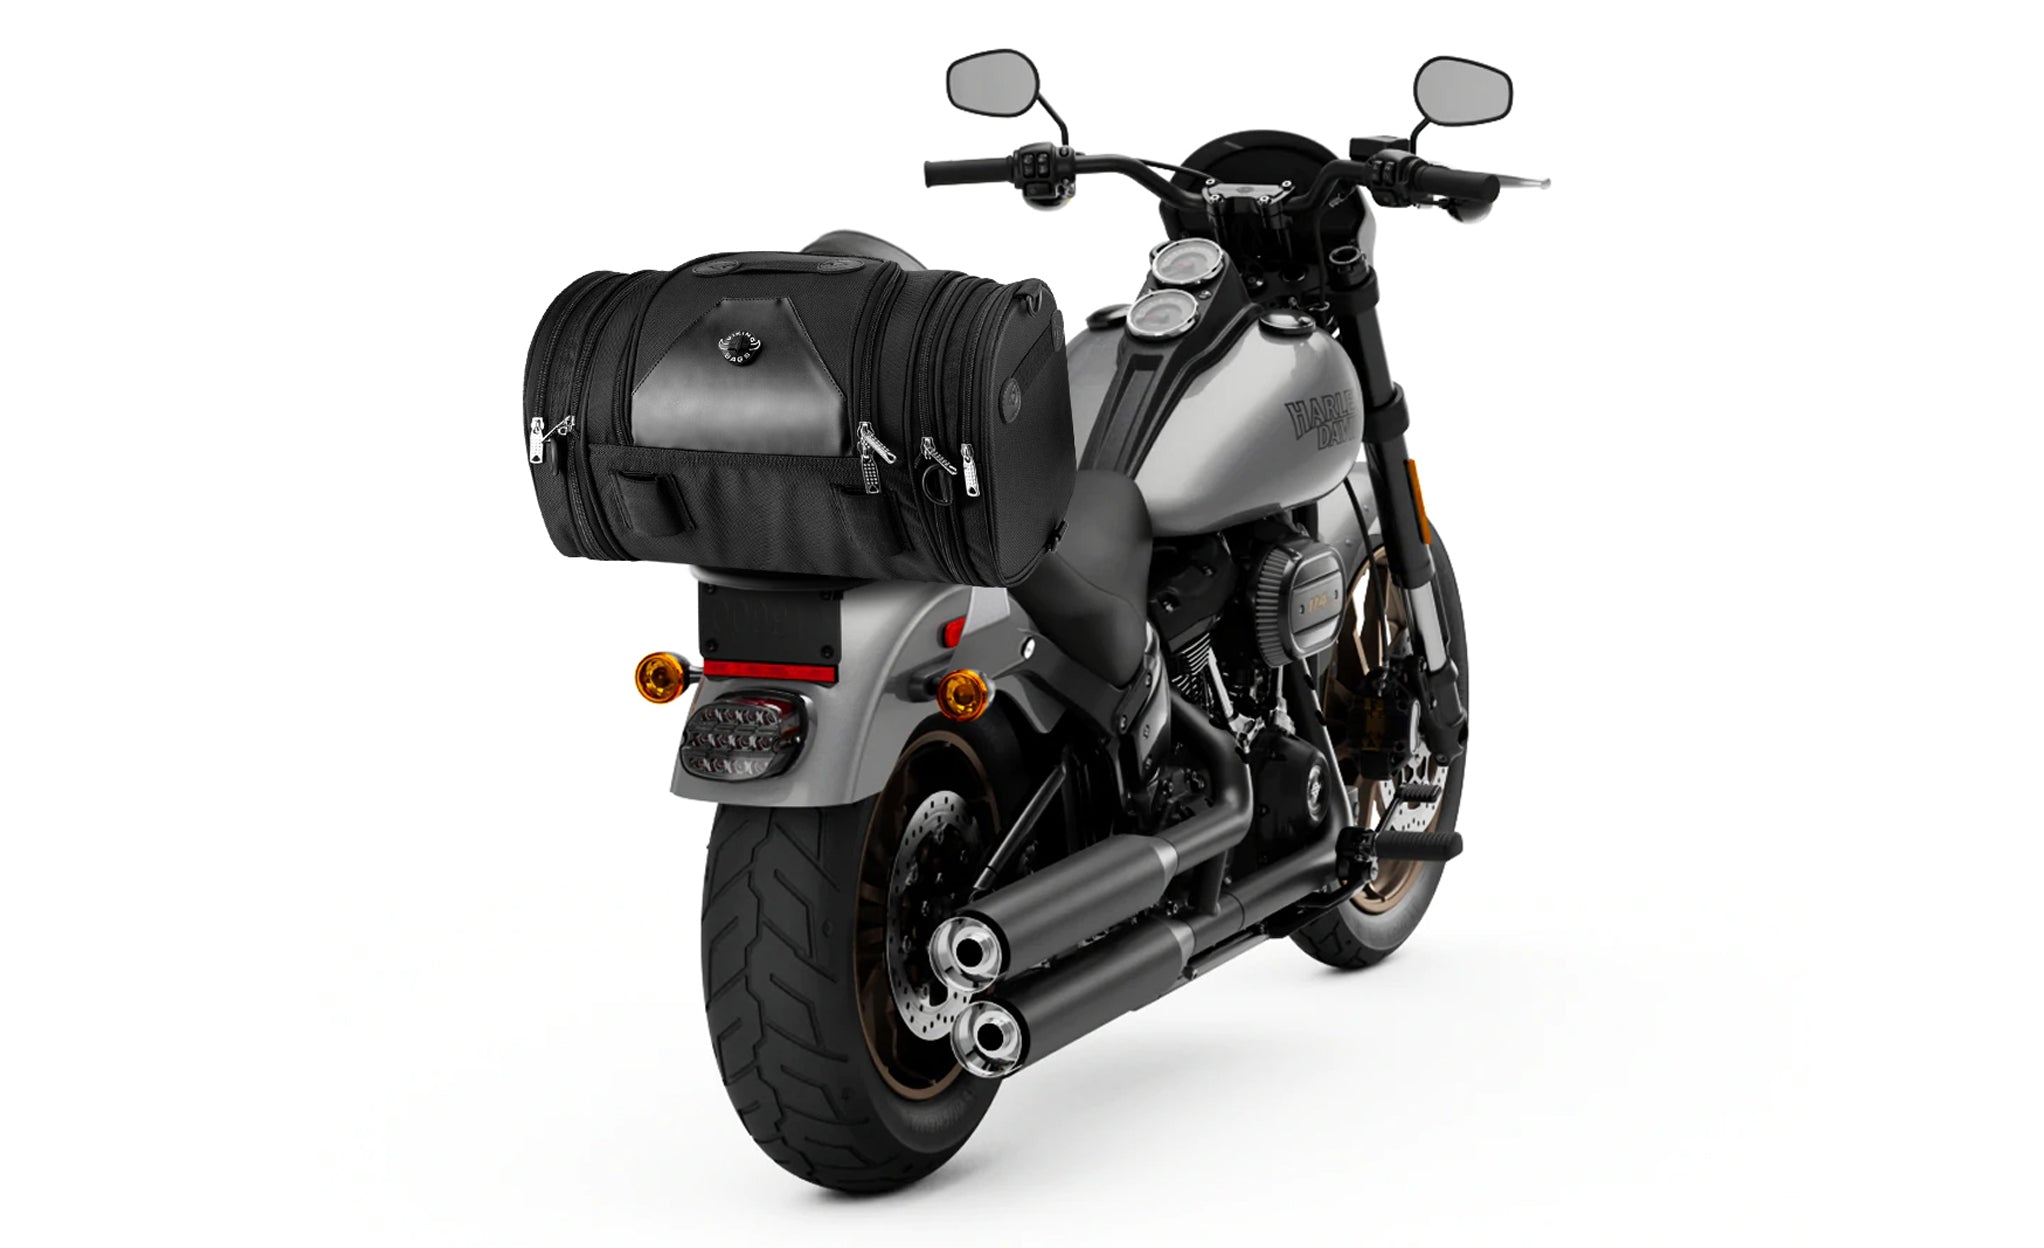 Viking Axwell Small Motorcycle Roll Bag for Harley Davidson Bag on Bike View @expand